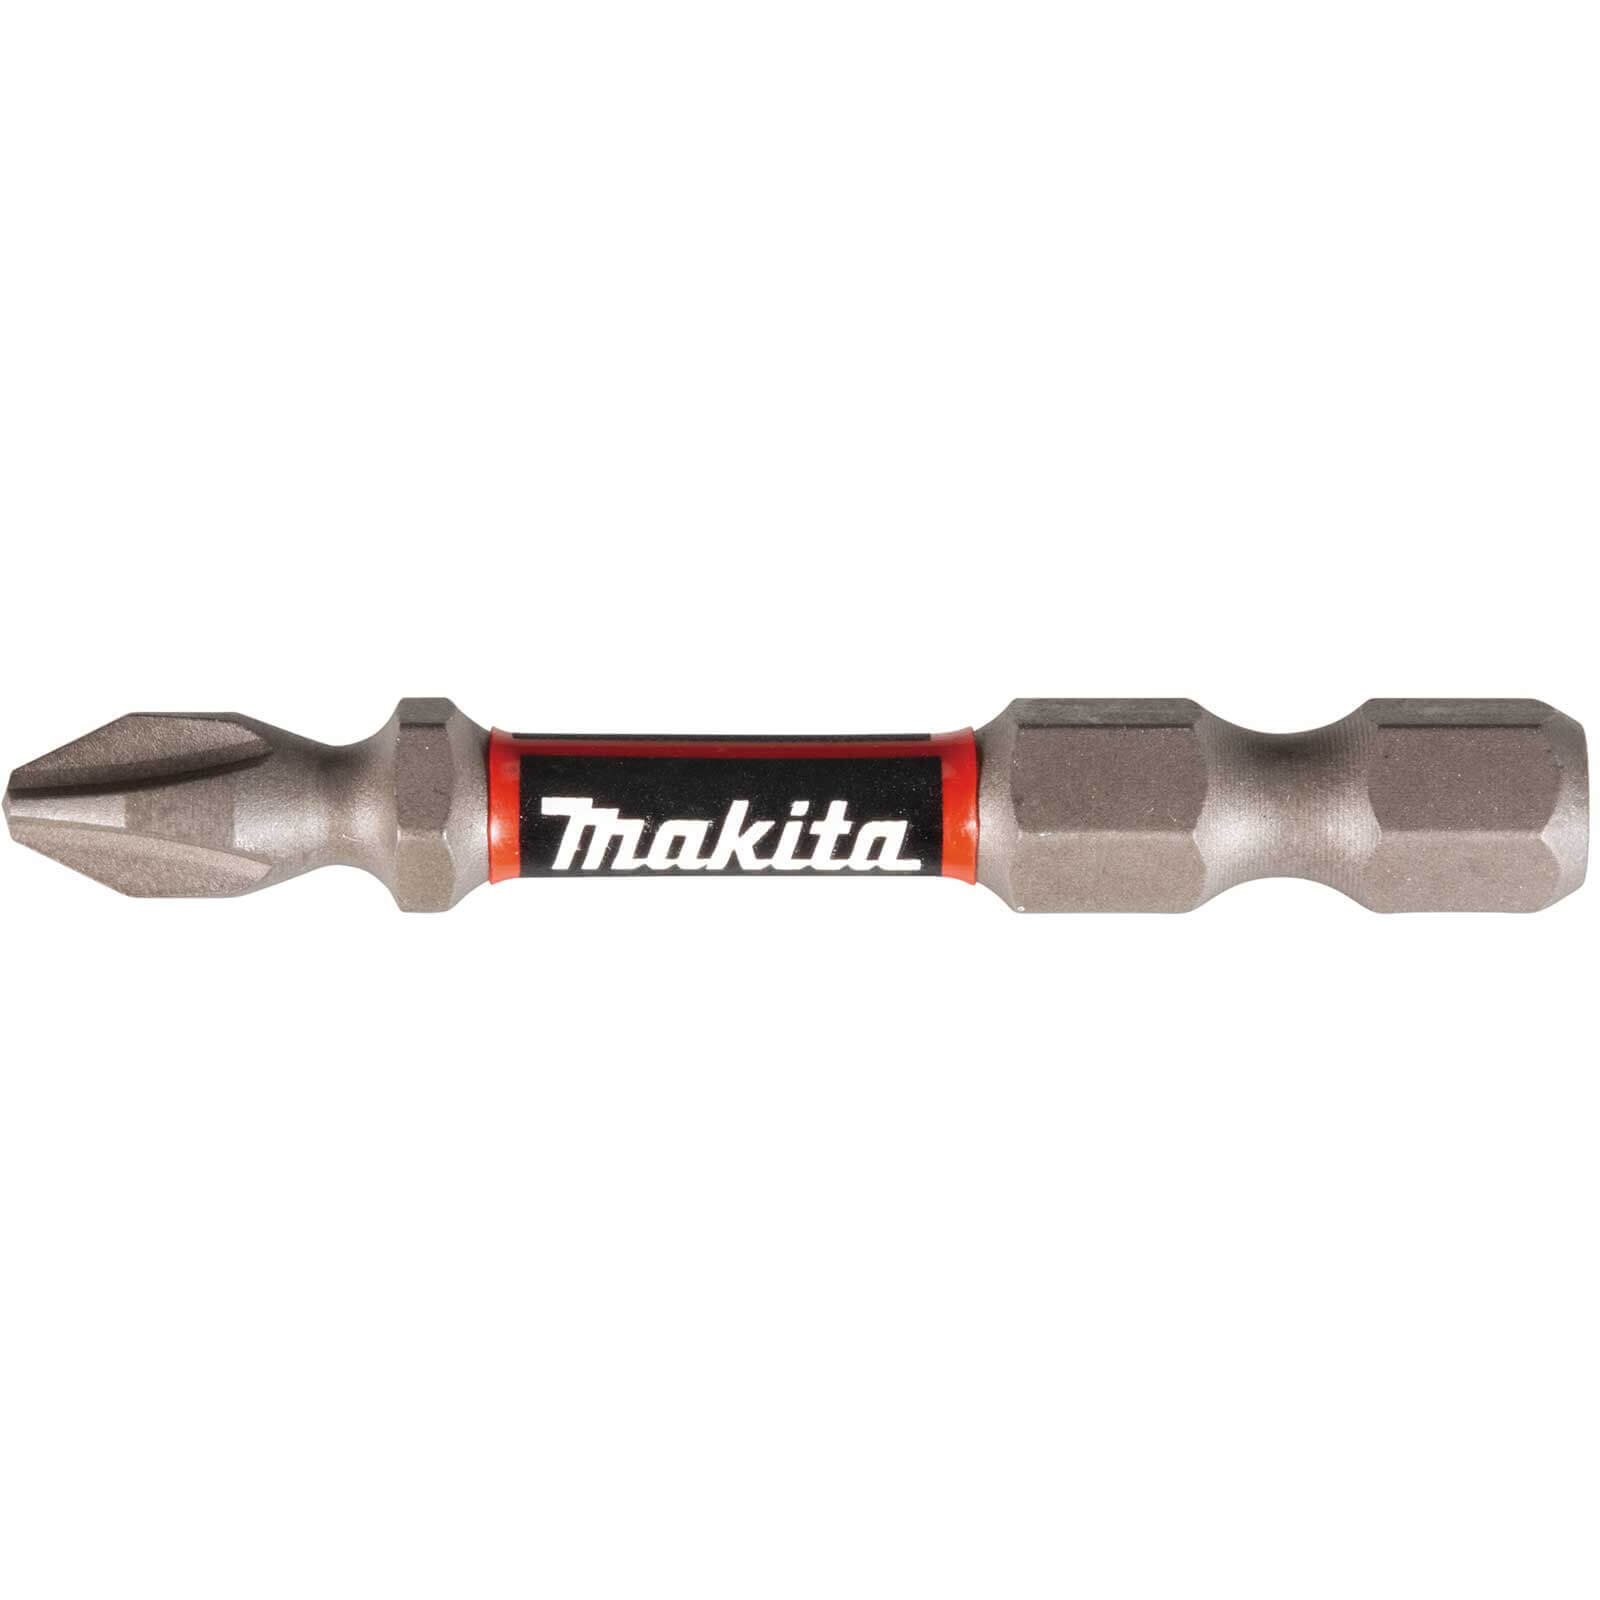 Image of Makita Impact Premier Double Torsion Philips Screwdriver Bits PH2 50mm Pack of 10